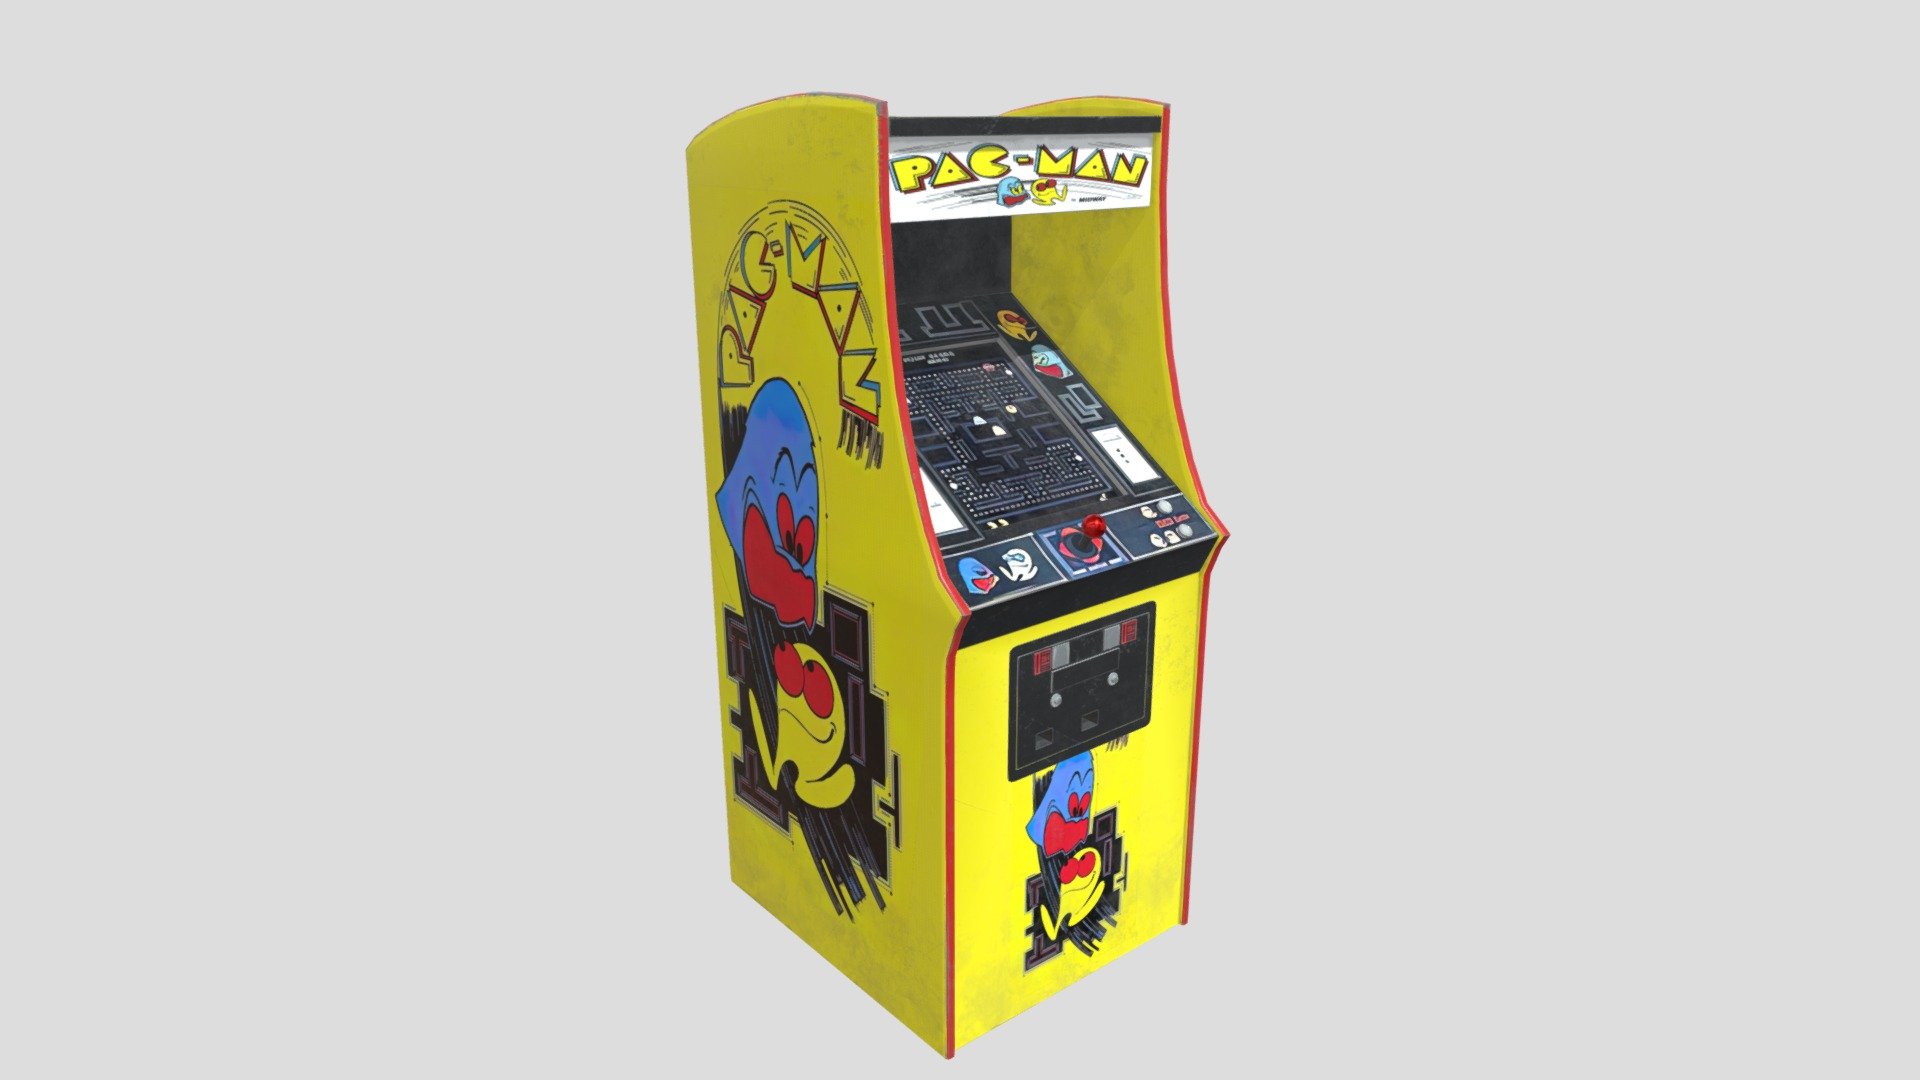 This Retro Arcade Pacman Machine is Fully Textured with vertex colors and UV Unwrapped for future texturing if that interests you. It is one single mesh with 1,683 vertices making it relatively LOW POLY

This Inlcudes:
8K Texture set
4K Texture set - Retro Pacman Arcade Machine 8K and 4K Textures - Buy Royalty Free 3D model by Desertsage 3d model